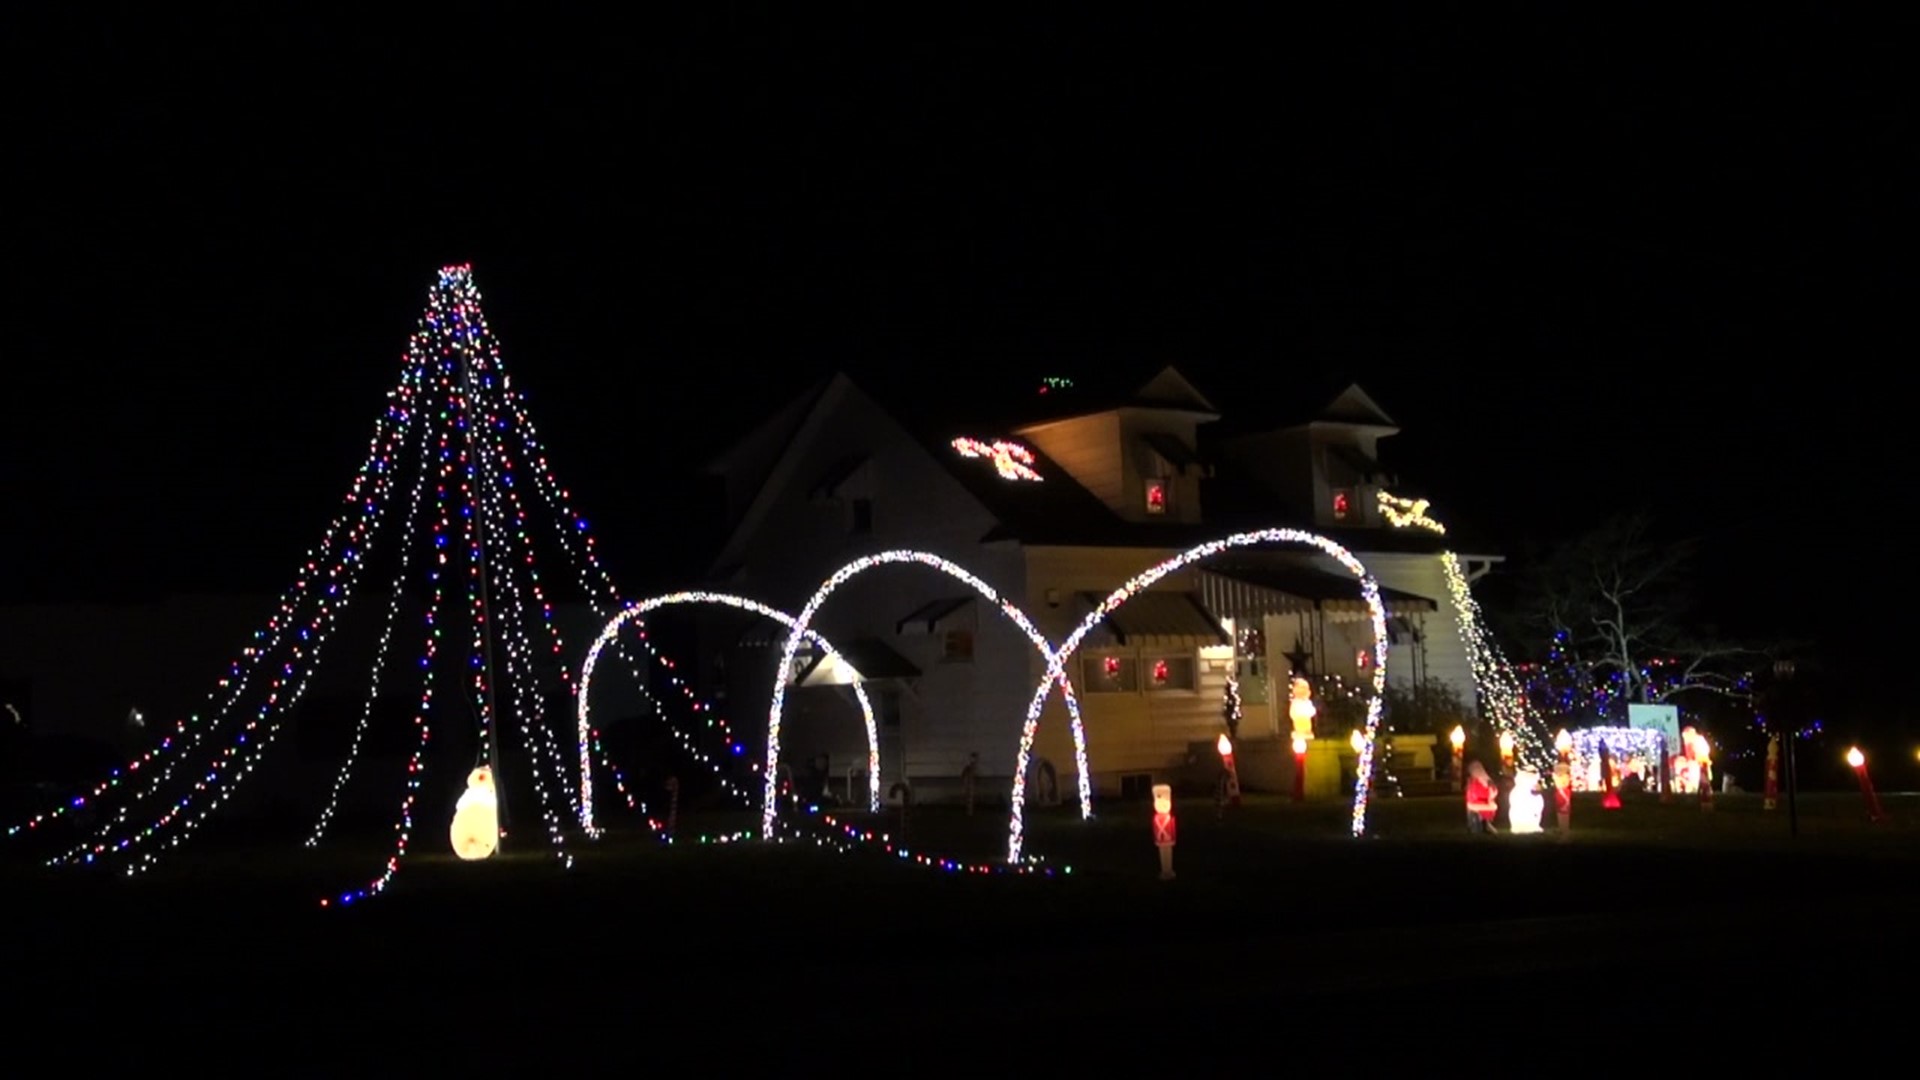 They help brighten this darkest week of the year—the glow of lights on home after home throughout our area.